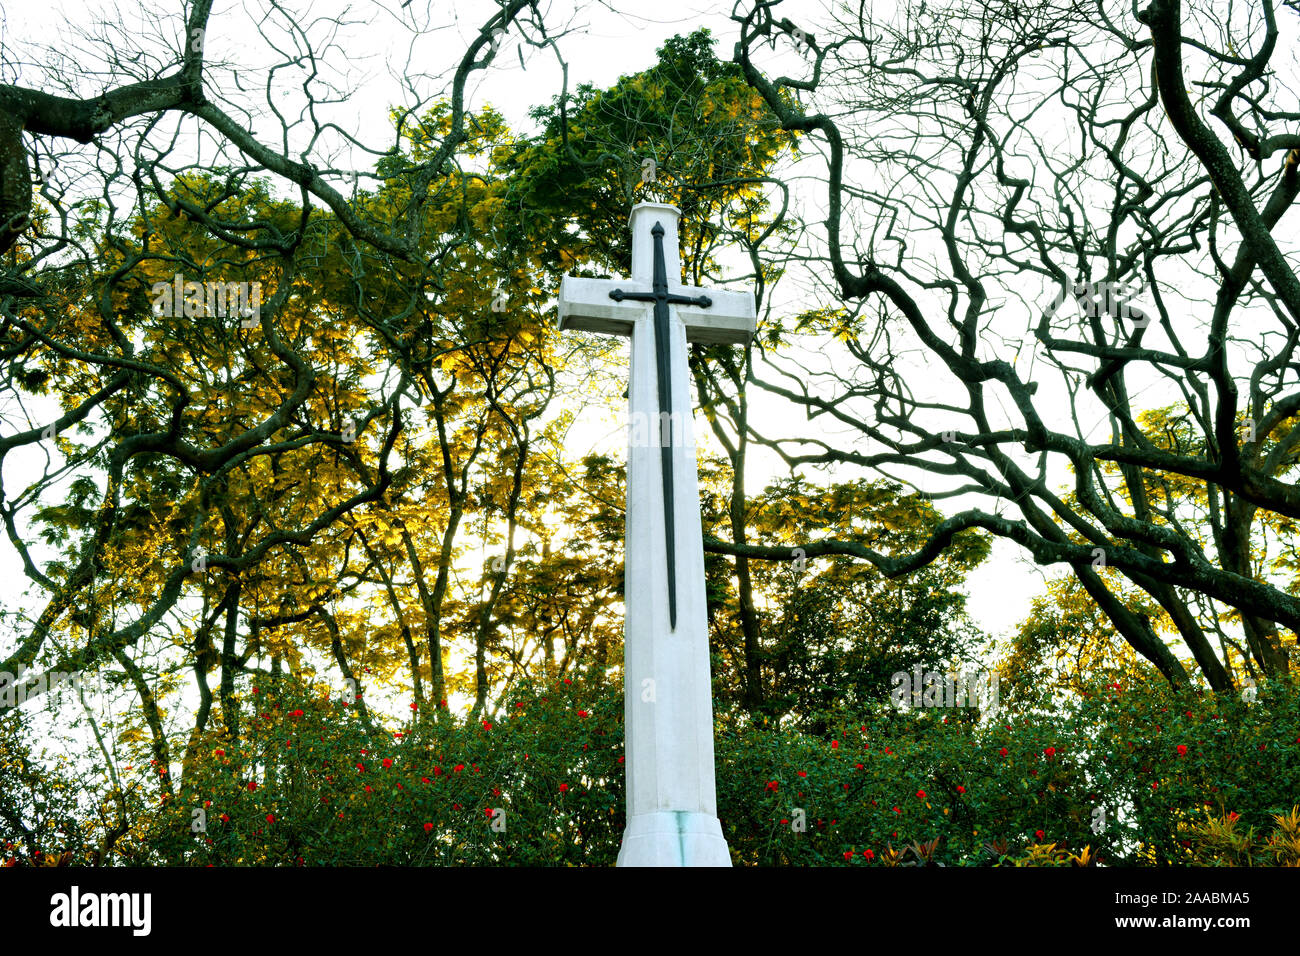 War Cemetery Warship sign in Commonwealth Cemetery in  Bangladesh. The Mainamati War Cemetery, also known as Comilla War Cemetery. Stock Photo